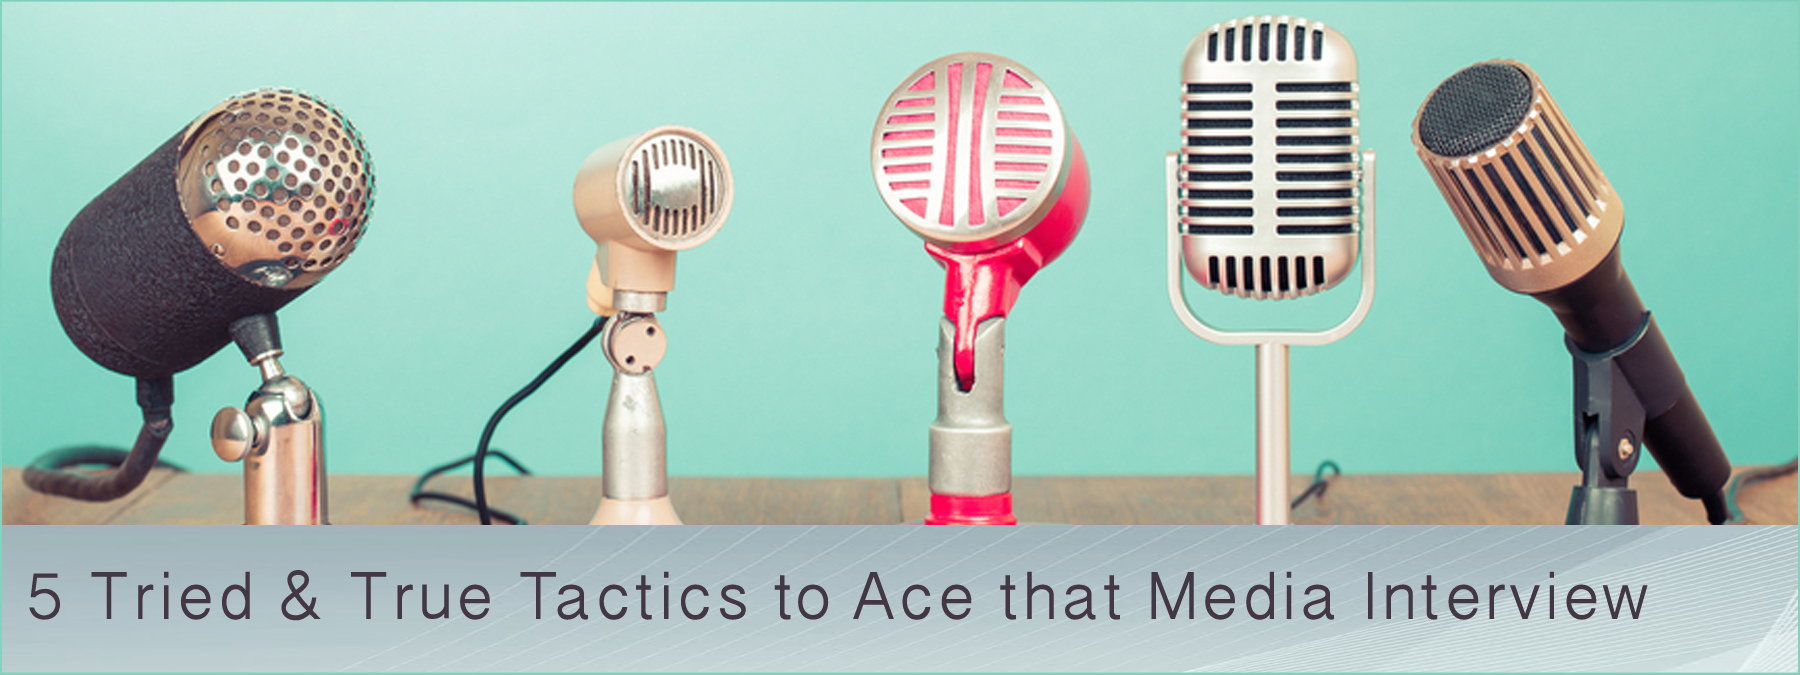 5 Tried-and-True Tactics to Help You Ace that Media Interview